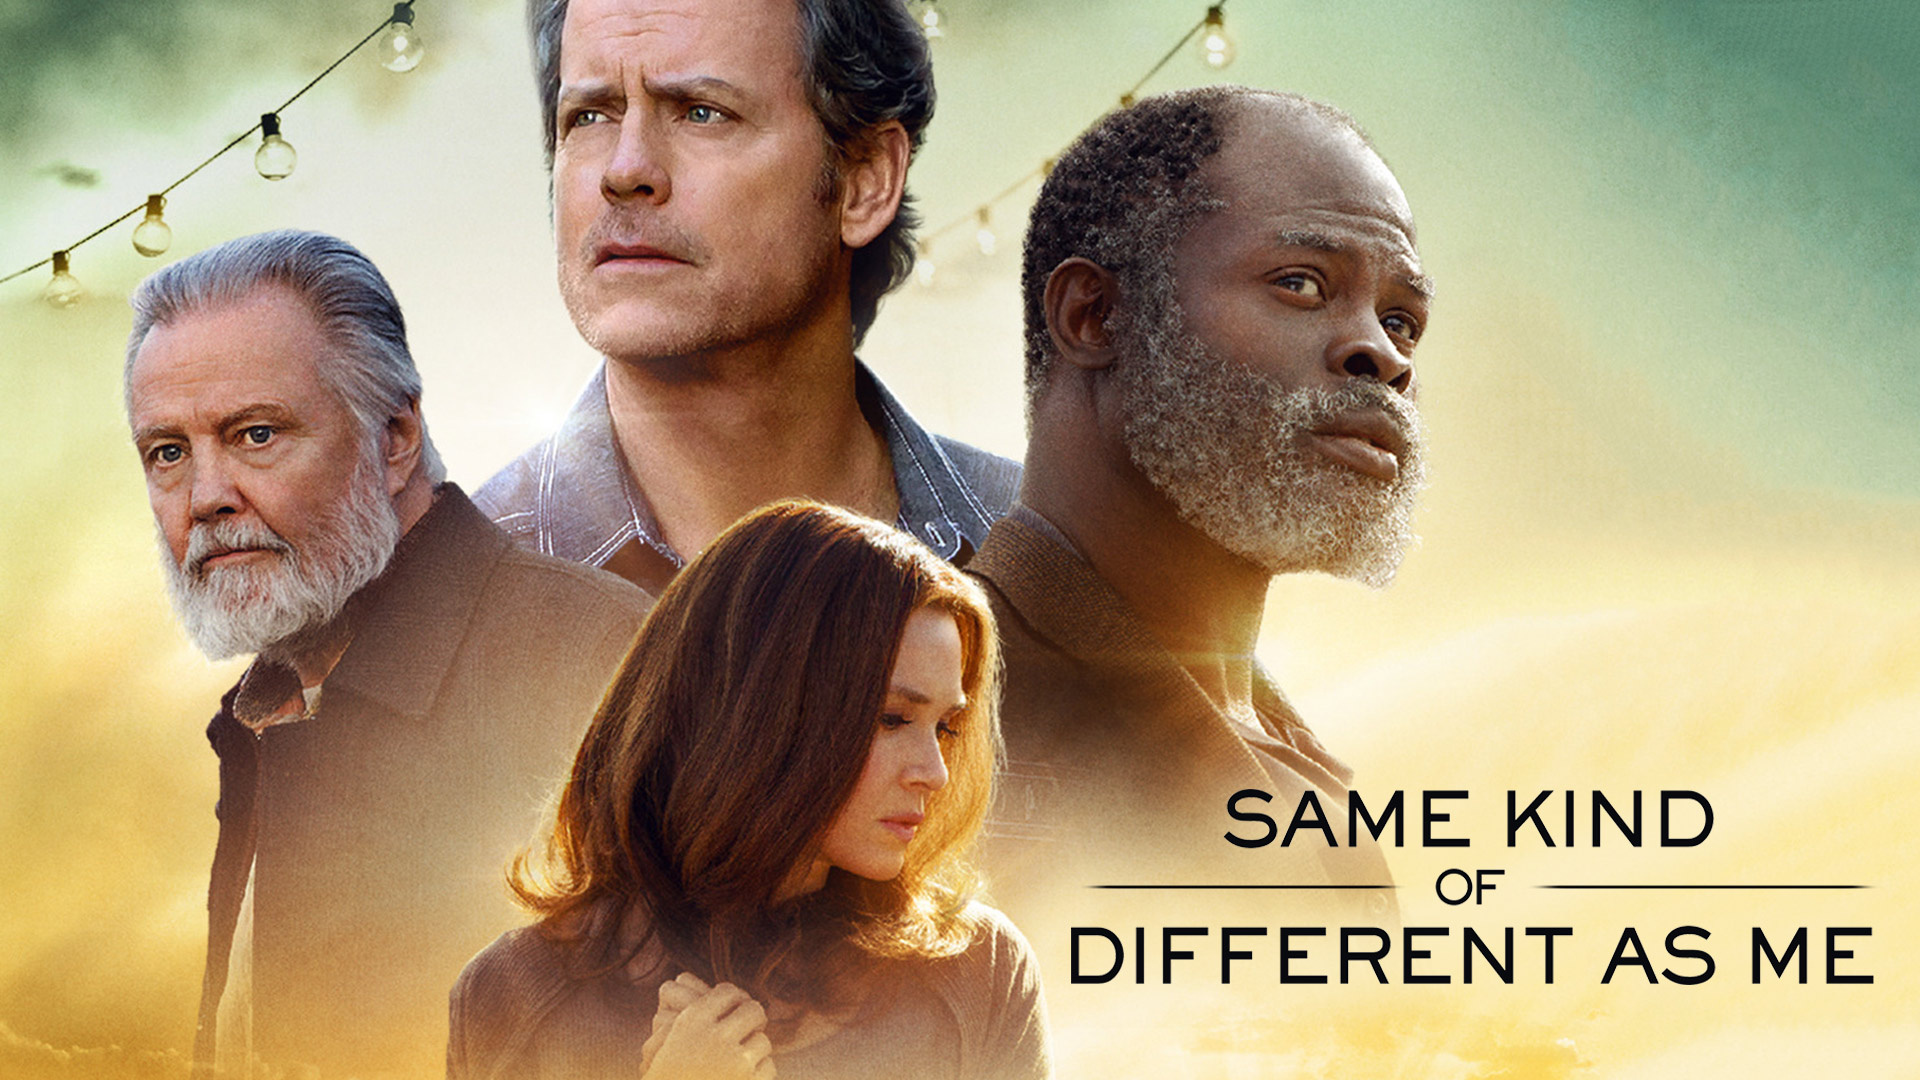 Same Kind of Different as Me movie, 2016 Radio Times, 1920x1080 Full HD Desktop